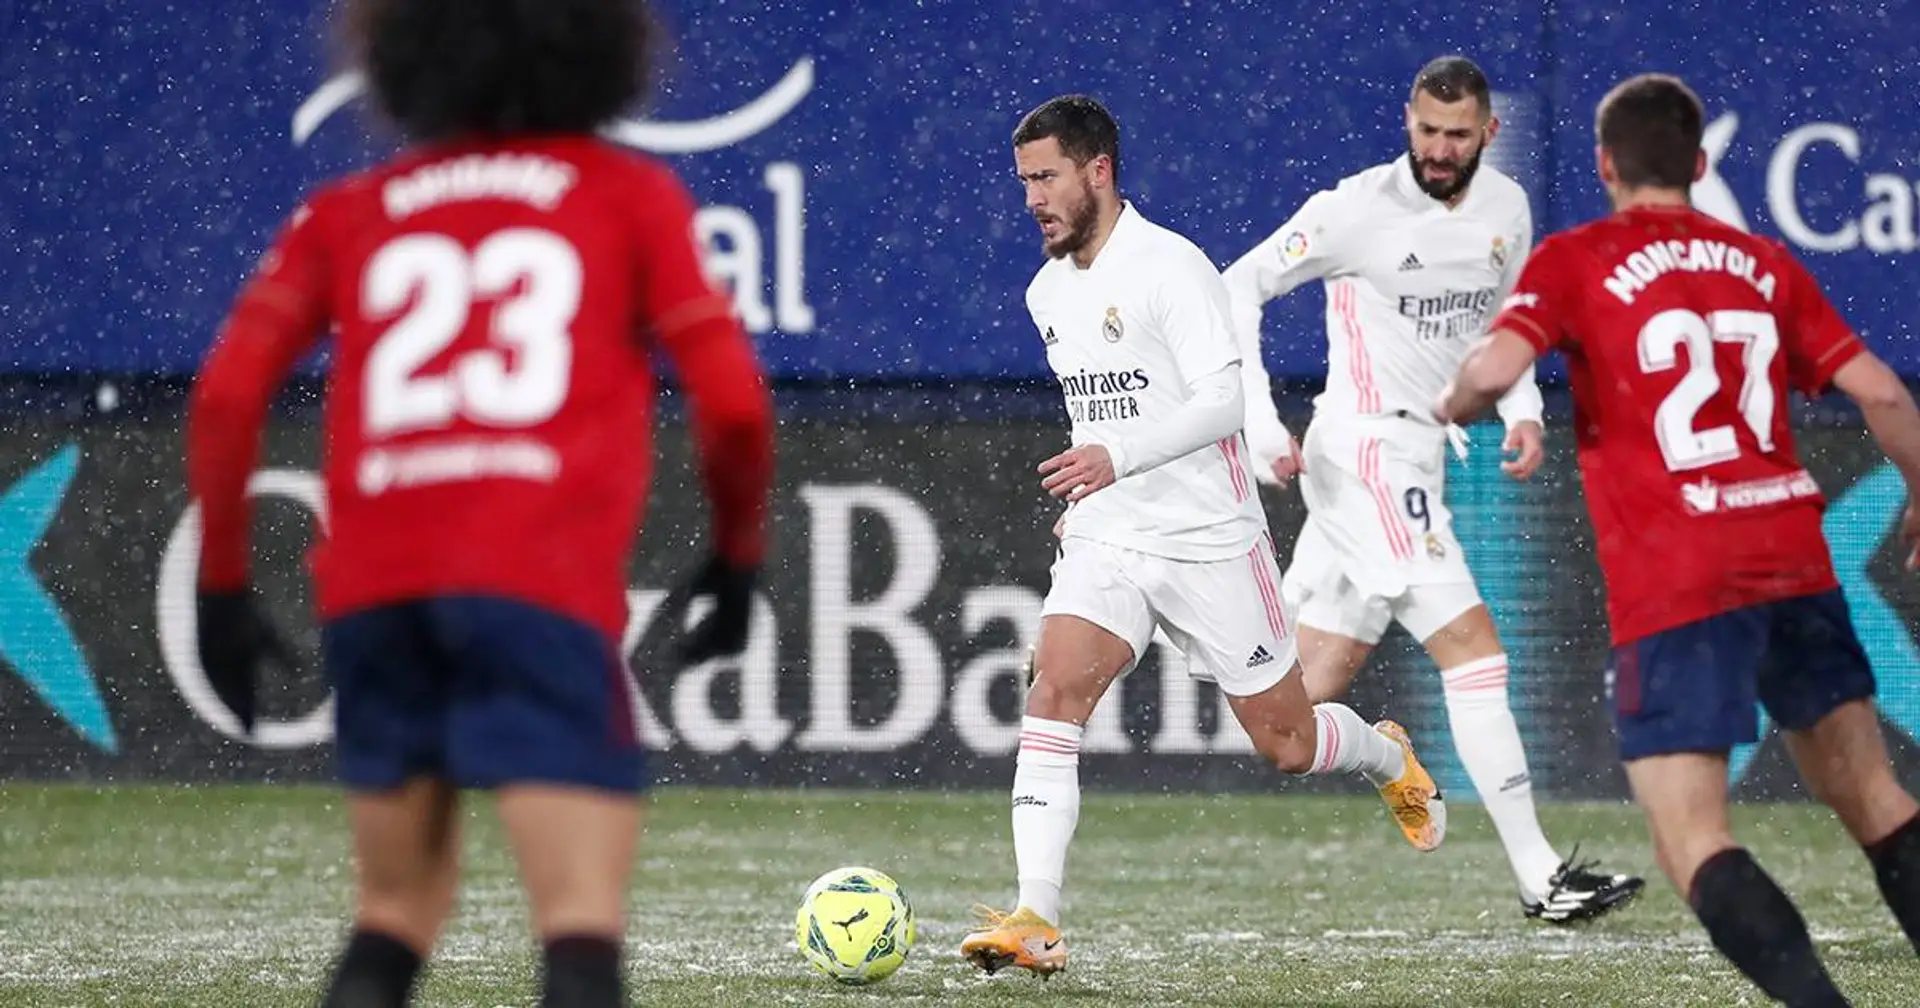 Madrid really struggle against Osasuna and heavy snowfall: confirmed by just 1 stats